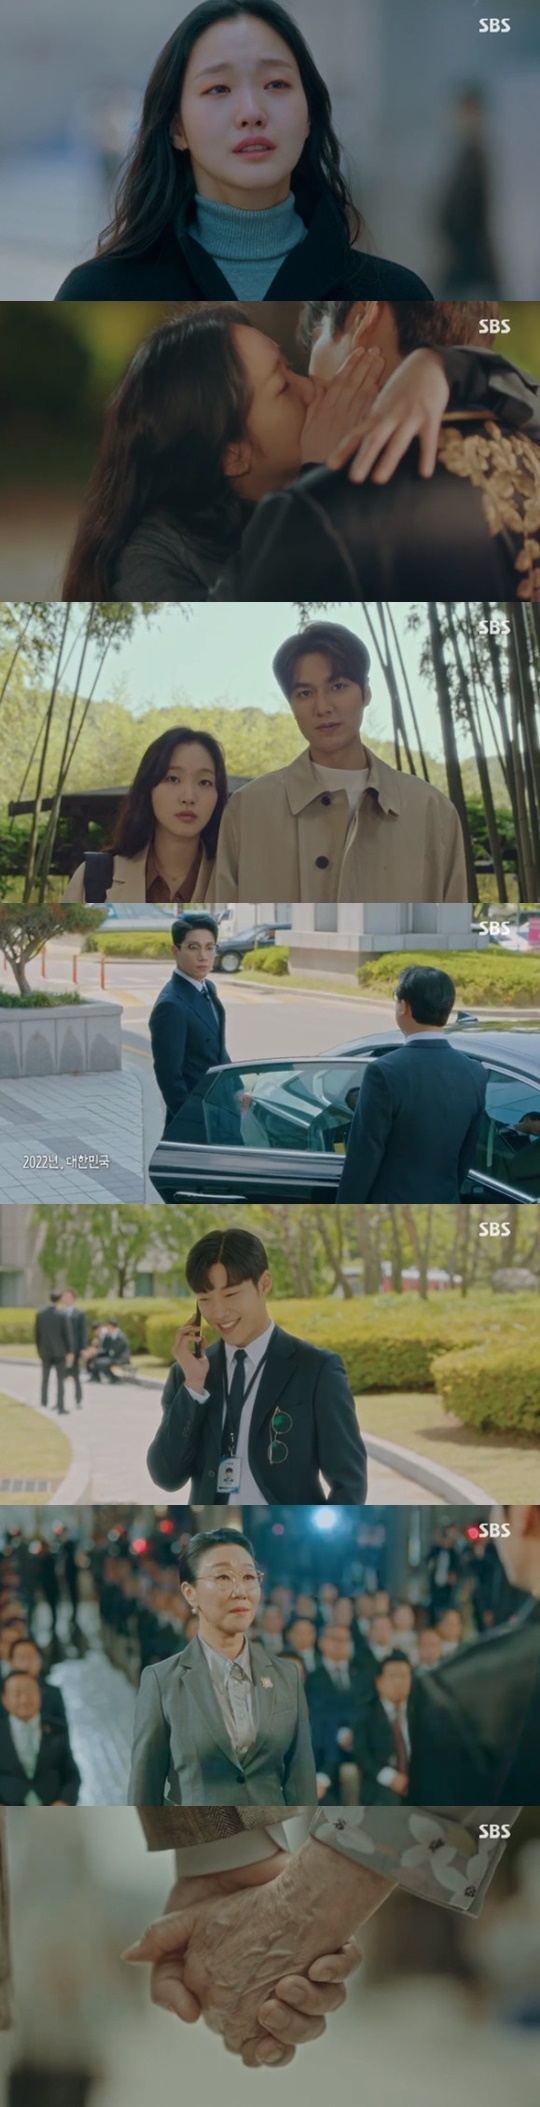 Seoul = = The King: Lord of Eternity Lee Min-ho, Kim Go-eun met and completed love.In the final episode of SBSs Golden Dragon The King: The Lord of Eternity (playplayplay by Kim Eun-sook/directed by Baek Sang-hoon and Jung Ji-hyun), which was broadcast at 10 p.m. on the 12th, Lee Gon (Lee Min-ho) and Cho Young (Udohwan) were portrayed as the night of the reverse motherhood.Kim Go-eun also headed into the Tanggan holding company with Lee Lim (Lee Jung-jin).In 1994, on the night of the Korean Empire reverse, the contrast defied the name of Igon and headed for Chunjongo.Thats my job. He kept the young man until the end. Eventually, Cho lost his mind and shook his head.At that time, Lee Tae-eun, who blocked Lee in the door of the dimension, said, If you return your grandfathers world, you will have no memory of this.Jung Tae-eun expressed his willingness to prevent him from coming if he failed, and said bitterly, I have a heartache and all the brilliant memories remain in my mind.There is no place where nothing flows, so I can not shoot.At that moment, Igon, who came to the bamboo forest after Irim, did not recognize Igon, but soon he realized that Igon was raised in front of his eyes.Eventually, Irim disappeared, and Jung Tae-eun, who noticed it, shed tears, You succeeded, then I can not come back.Jung Tae-eul woke up in the bamboo forest in South Korea. Jung Tae-eul hastily checked the date and confirmed the life and death of the remaining person.Jung Tae-eul, who kept all the memories, said, It was only a week or so for me, but the world was flowing differently.I am still a lieutenant and still a good daughter once a month, and I am saddened by the thought that I am living my work and daily life in a world where he is not even a new brother, remembering all the moments he came to me. Then, Jung Tae-eul happened to face Lee Ji-hoon (Lee Min-ho), who looked like Lee Gon, but Lee Ji-hoon passed by without recognizing the situation.Jung Tae-eul sank down and said, Come on.At that time, Igon looked for Jung Tae and crossed all worlds and faced a different aspect of the situation.Finally, Lee, who faced South Koreas 2021 situation, once again confirmed his tearful state of mind when he saw himself, and eventually they checked each other, hugged each other, and kissed each other.I love you, I havent told you yet, he confessed, and I love you so much. Jeong Tae-eul said, This is the completion. I love you too.I love you so much, too, she replied.The Korean Empires Igon and South Koreas status enjoyed traveling together across several parallel worlds on weekends.Meanwhile, Lee went to South Korea in 1994 and faced a young Kang Shin-jae.Kang Shin-jae was able to avoid accidents, and in 2022 Kang Shin-jae (Kim Kyung-nam) grew up safely as it was.In addition, Lee met Cho Eun-seop (Udo-hwan), who worked for the National Intelligence Service, and Cho Eun-seop failed to remember Lee. Korean Empire Secretary (Baek Hyun-joo) became prime minister.Lee was the emperor of Korean Empire, and Jung Tae-eul was a detective of South Korea. He lived his life and the two continued to love and grew old together.Meanwhile, SBS The King: The Monarch of Eternity will be followed by Convenience Store Morning Star starring Ji Chang-wook and Kim Yoo-jung.